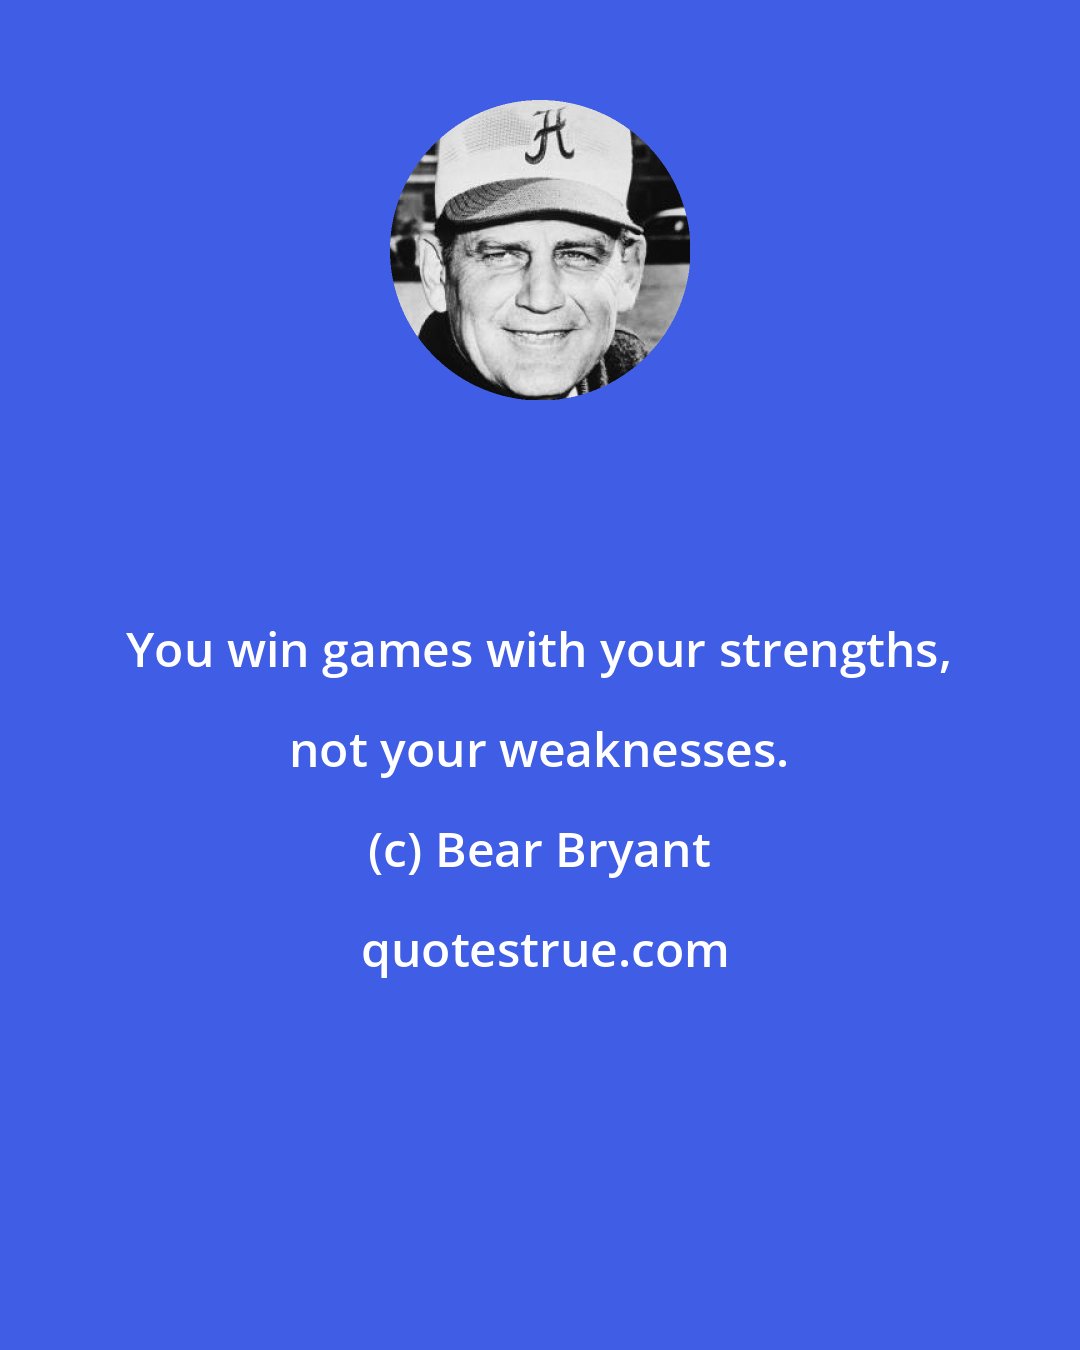 Bear Bryant: You win games with your strengths, not your weaknesses.